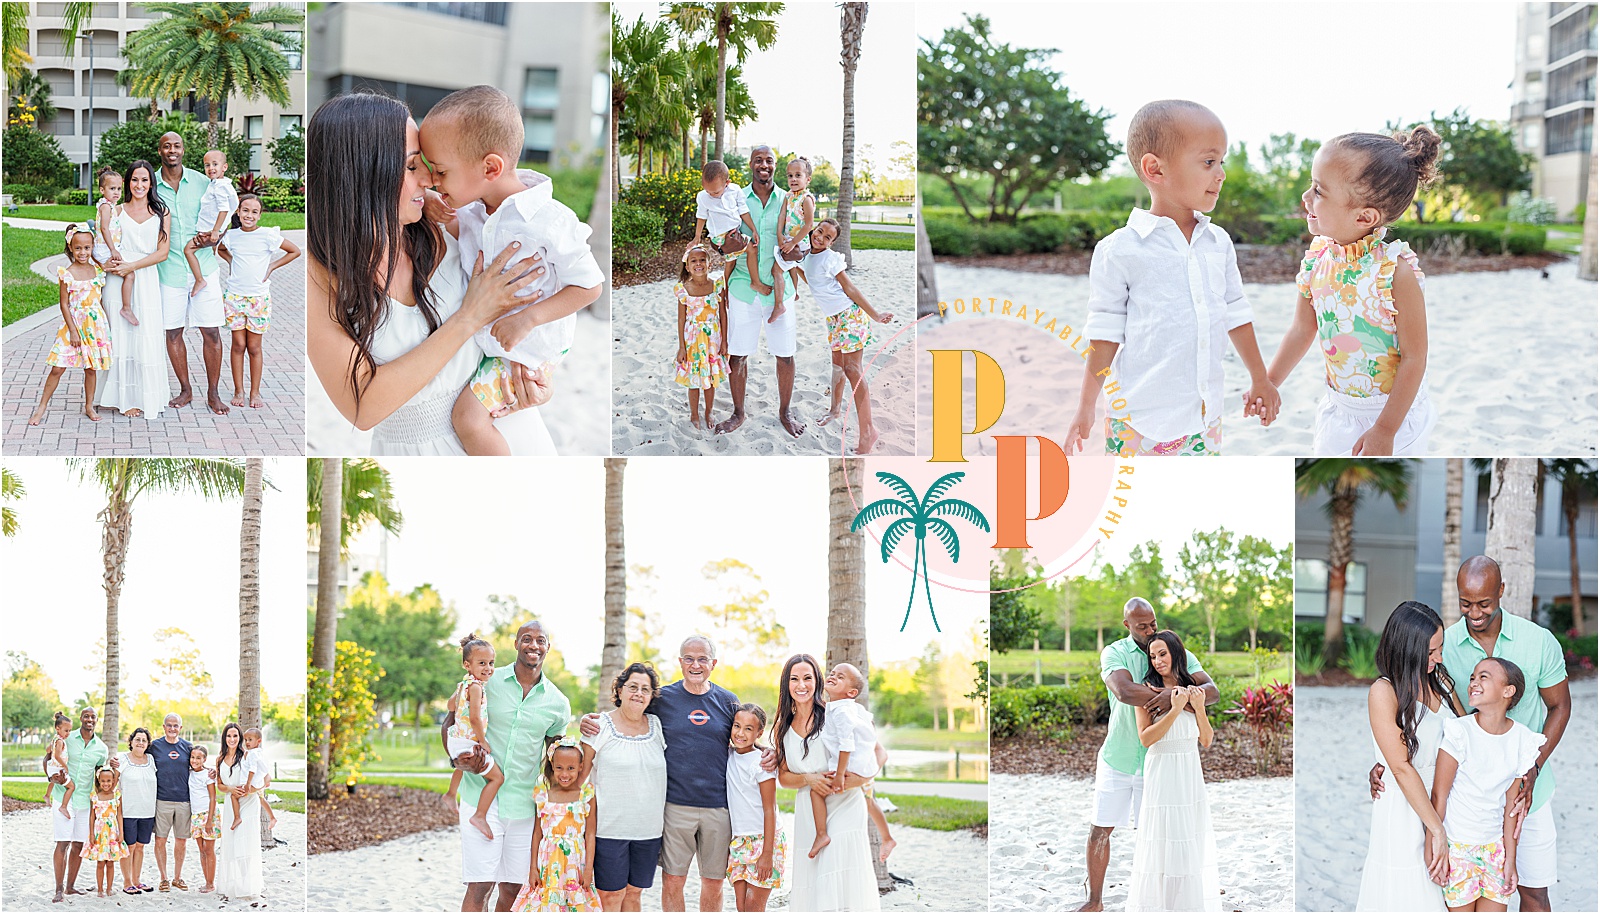 Radiant family framed by lush palm trees at The Grove Resort Orlando, creating timeless family portraits amid the tropical beauty of this enchanting location